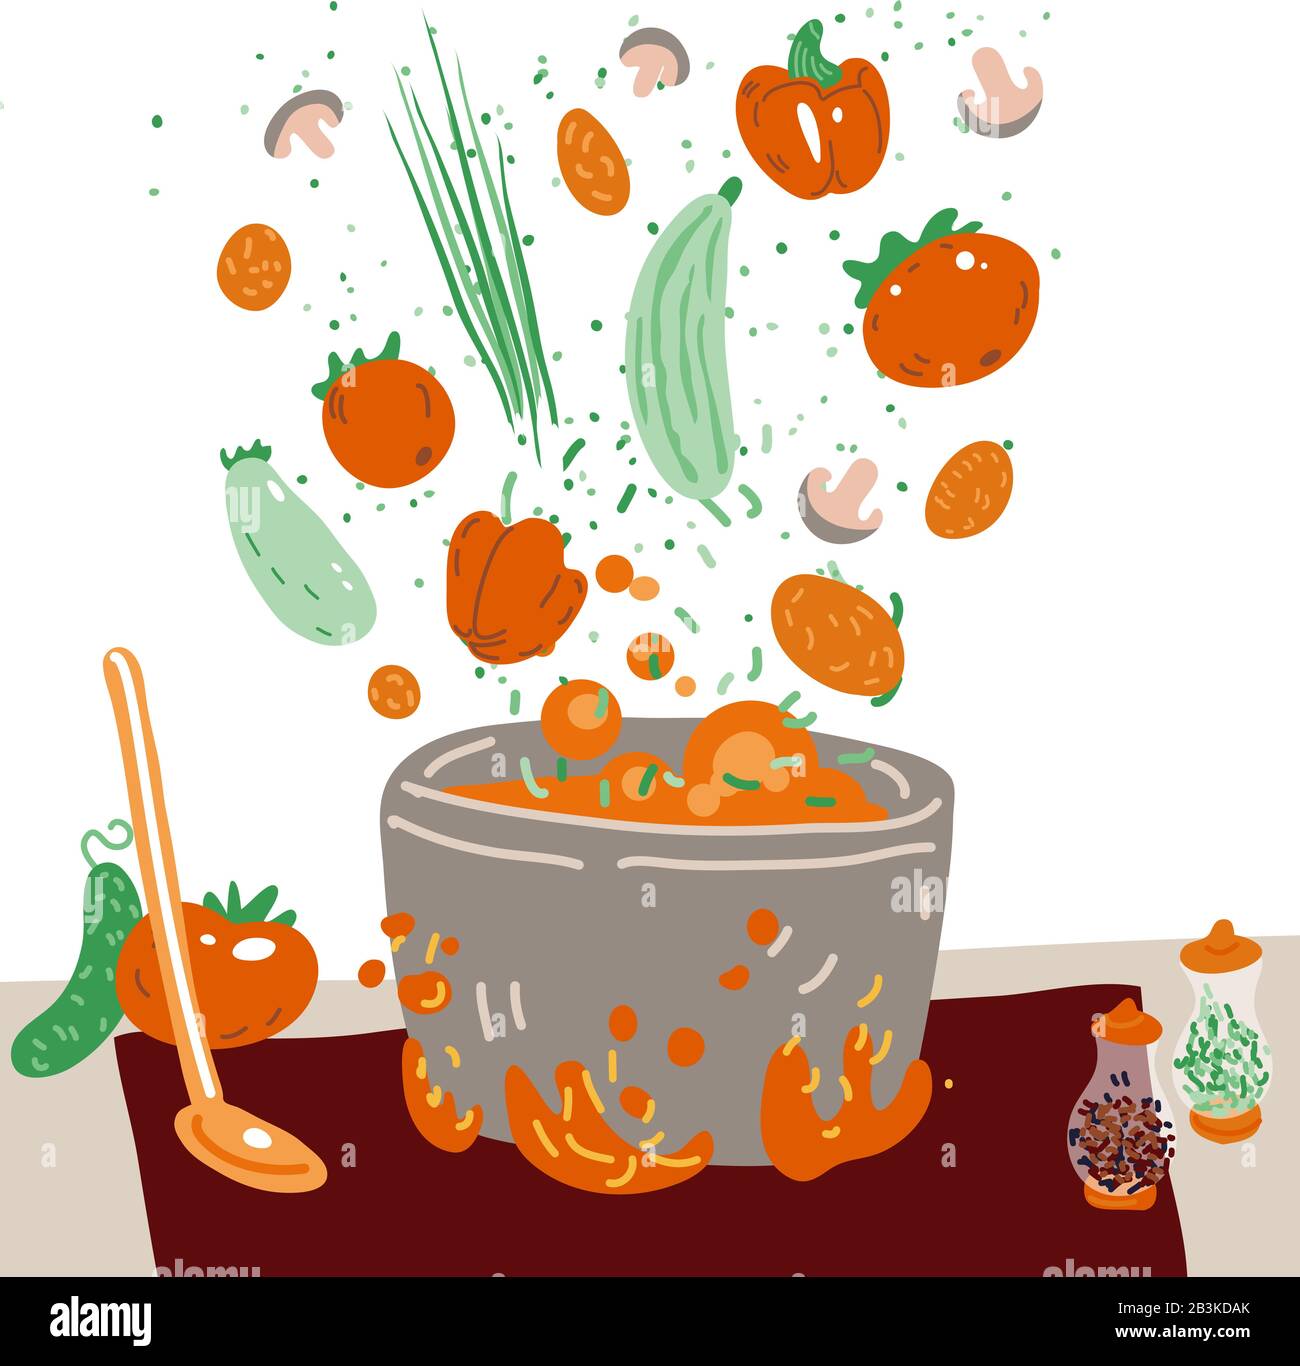 Making vegetarian soup vector concept. Pot with bulbing delicious veg food on a fire and all ingredients around it - vegetables, greenery, seasonings Stock Vector